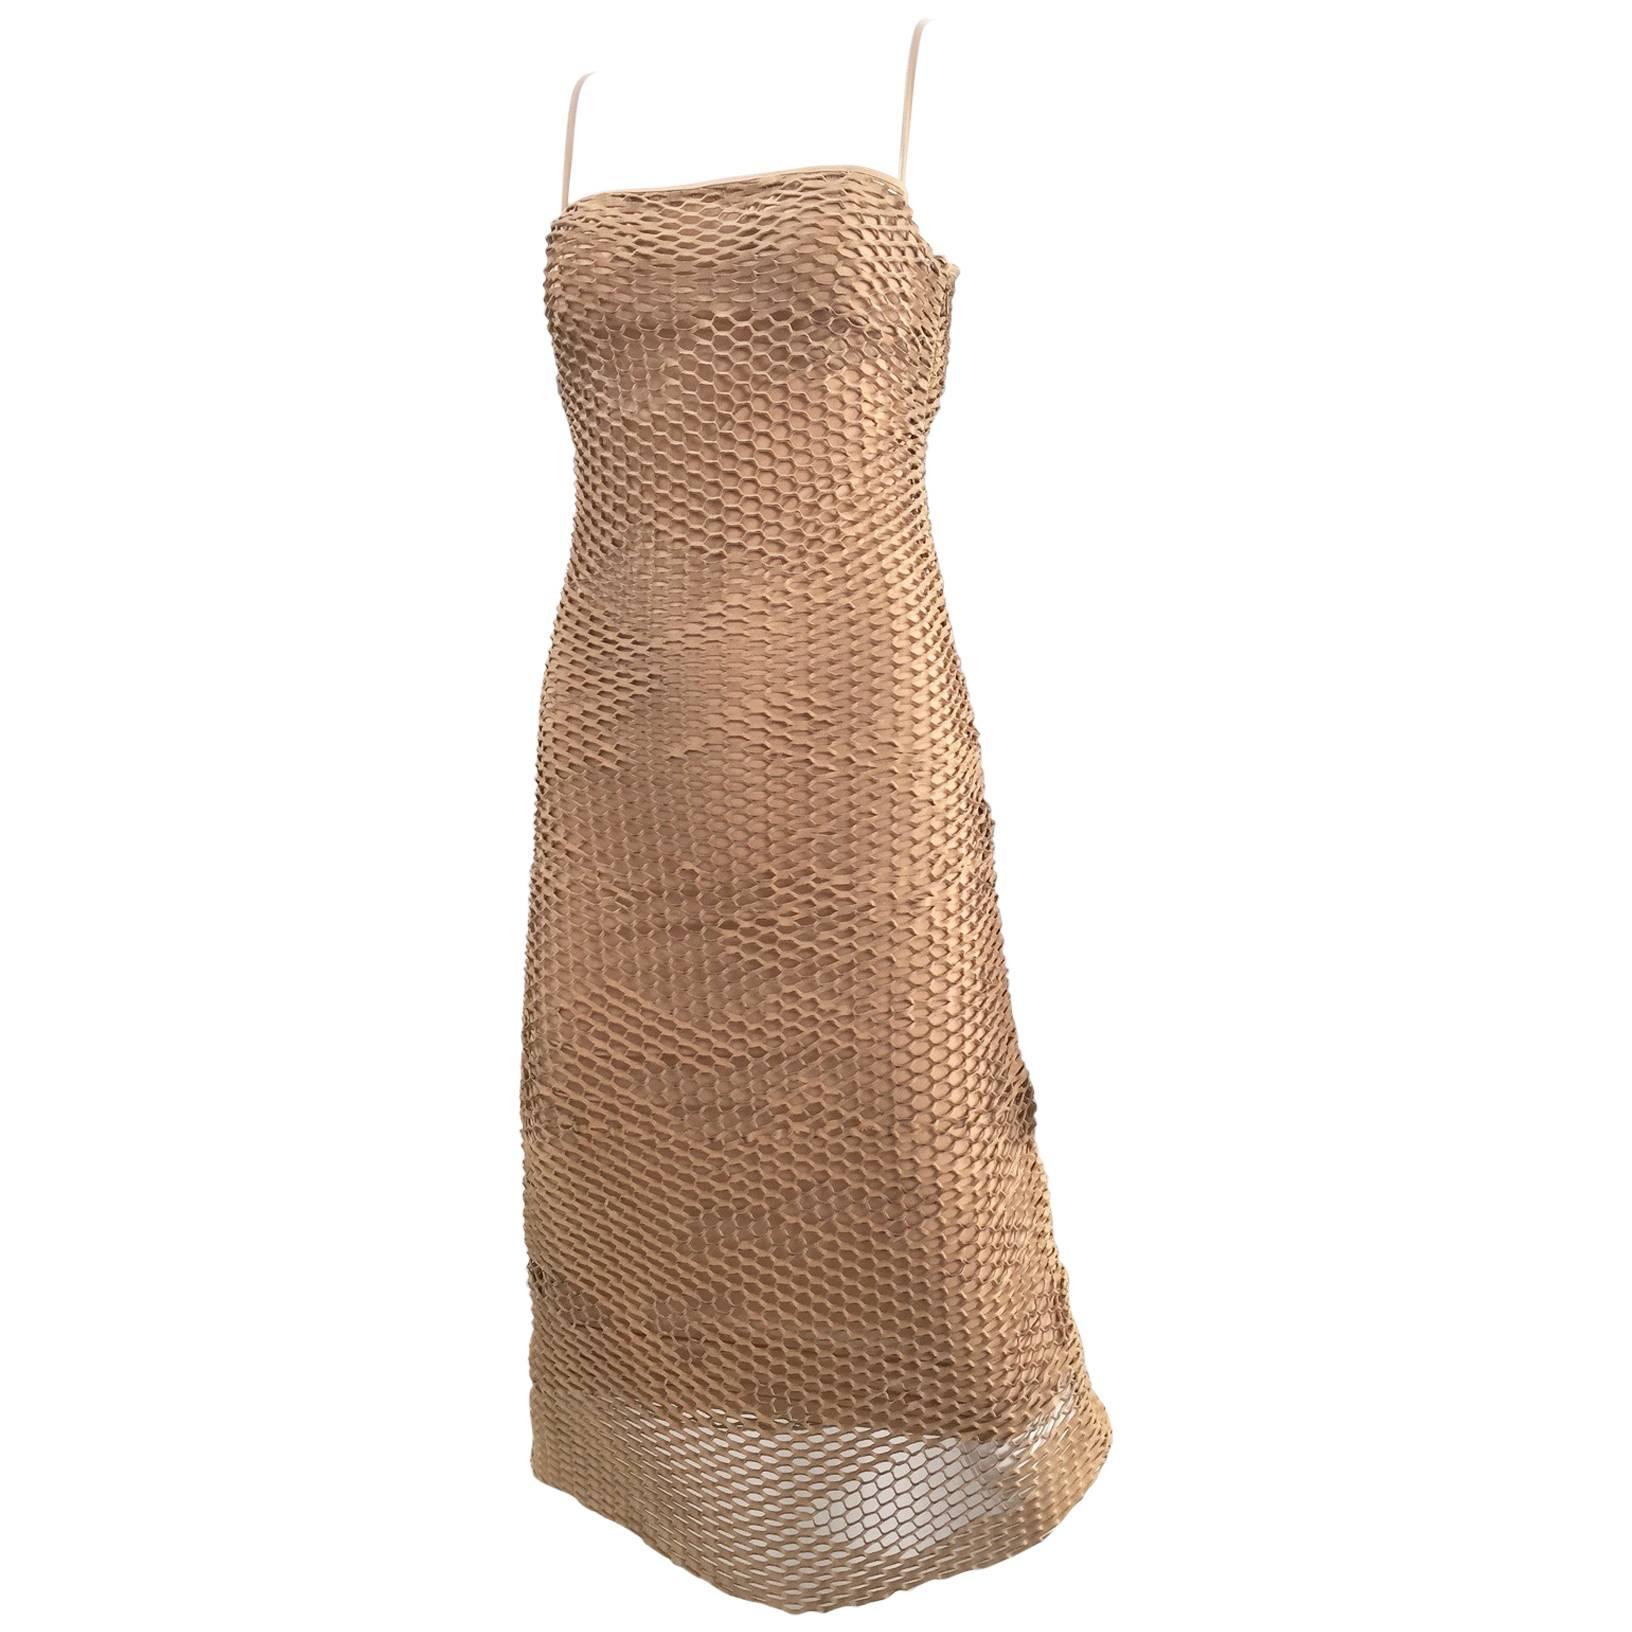 90s Richad Tyler tan leather cut out dress For Sale